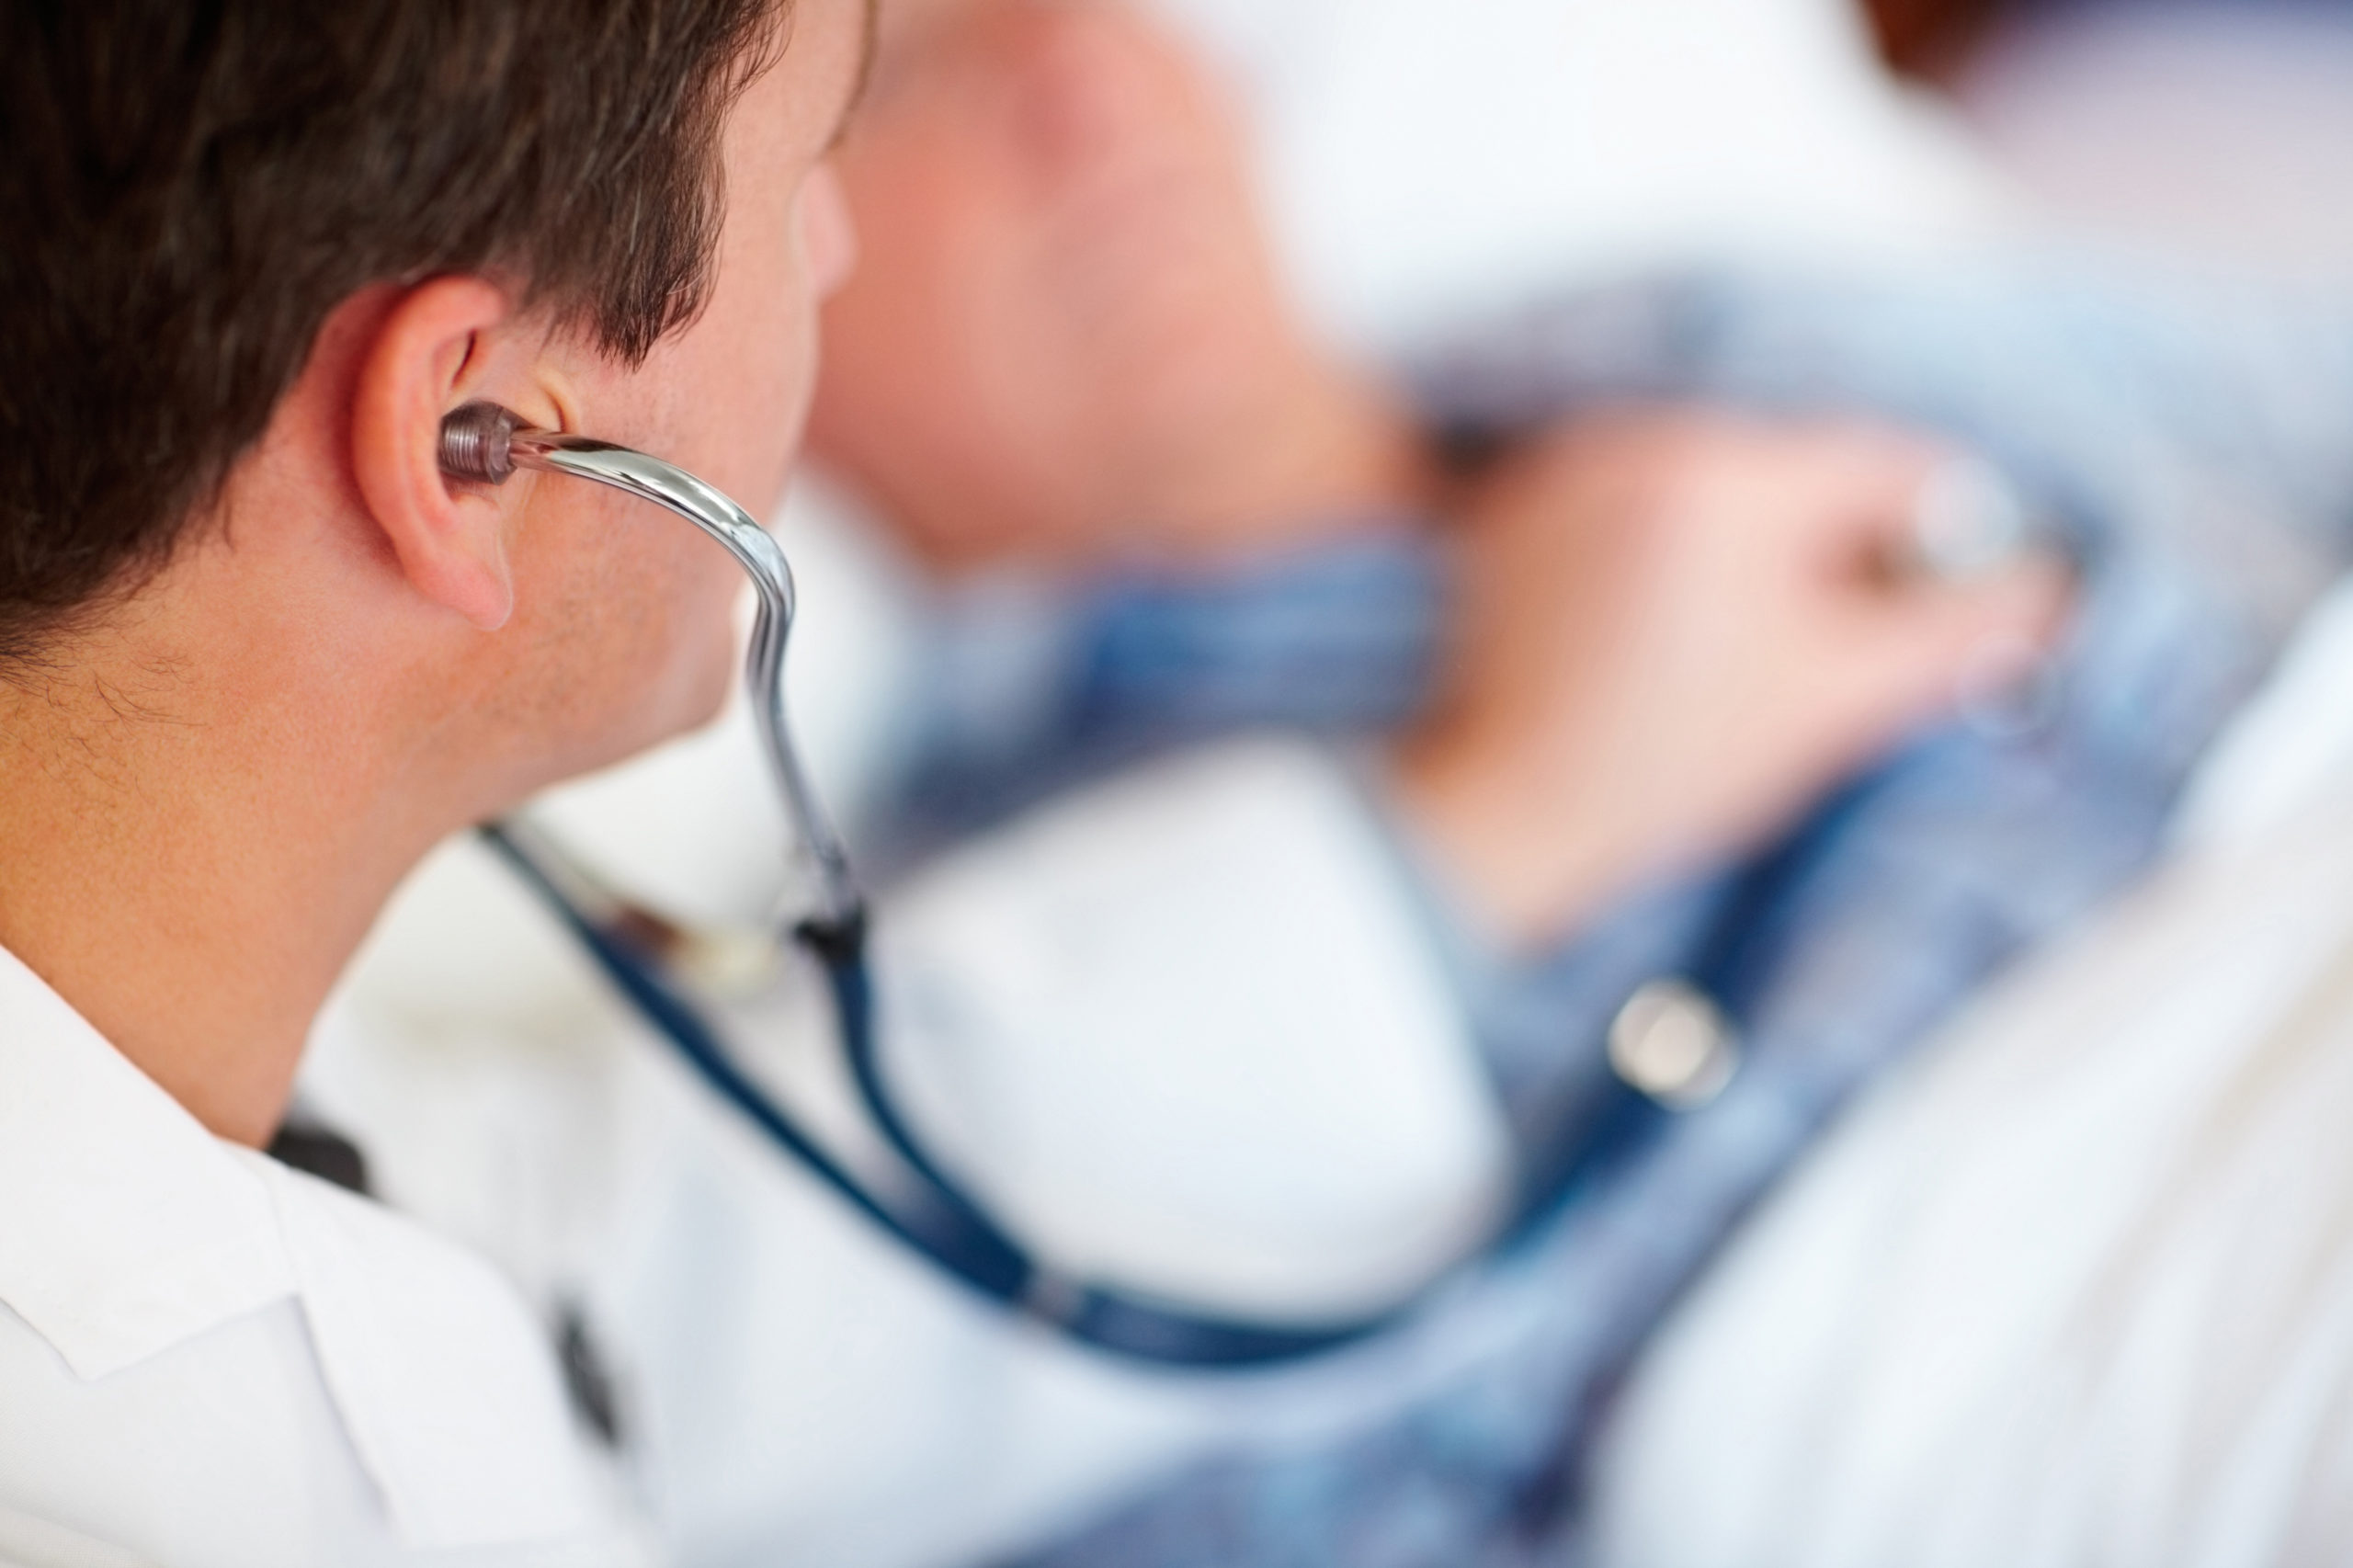 Male doctor listening to a patient's heart beat with a stethoscope